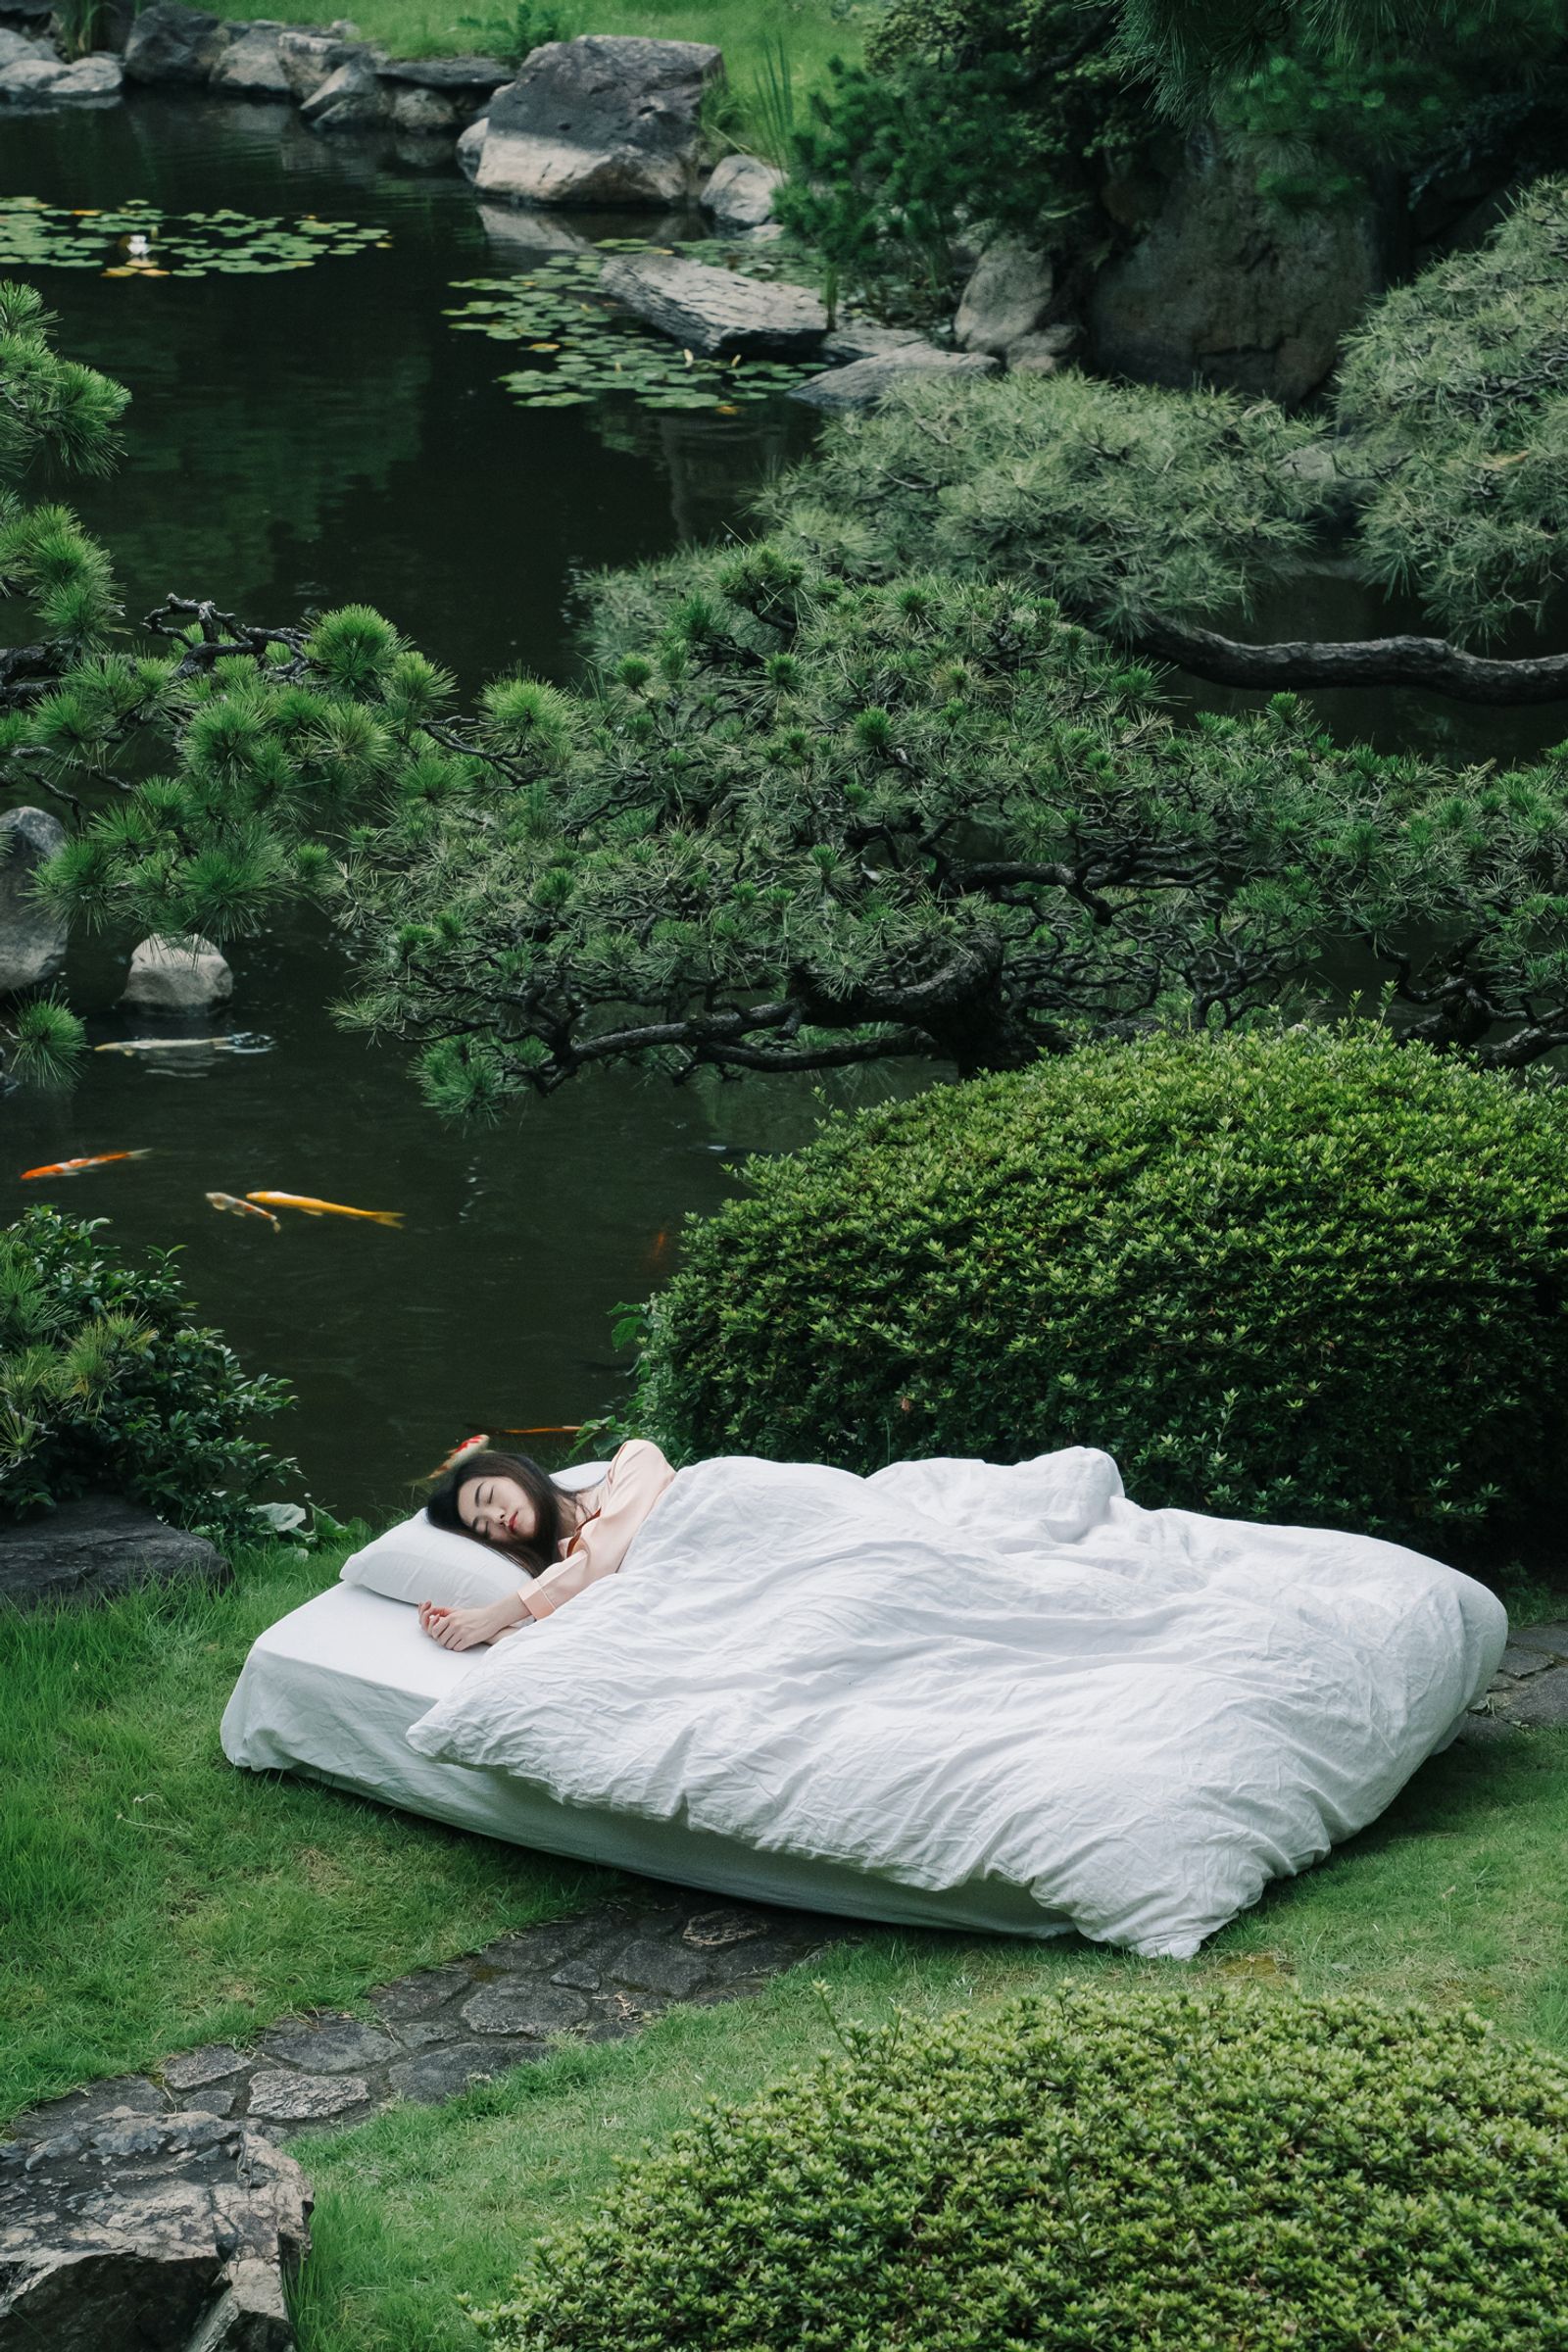 © Kenta Nakamura - This picture was taken during the curfew of the coronavirus pandemic, when the bed was brought into the hotel garden.